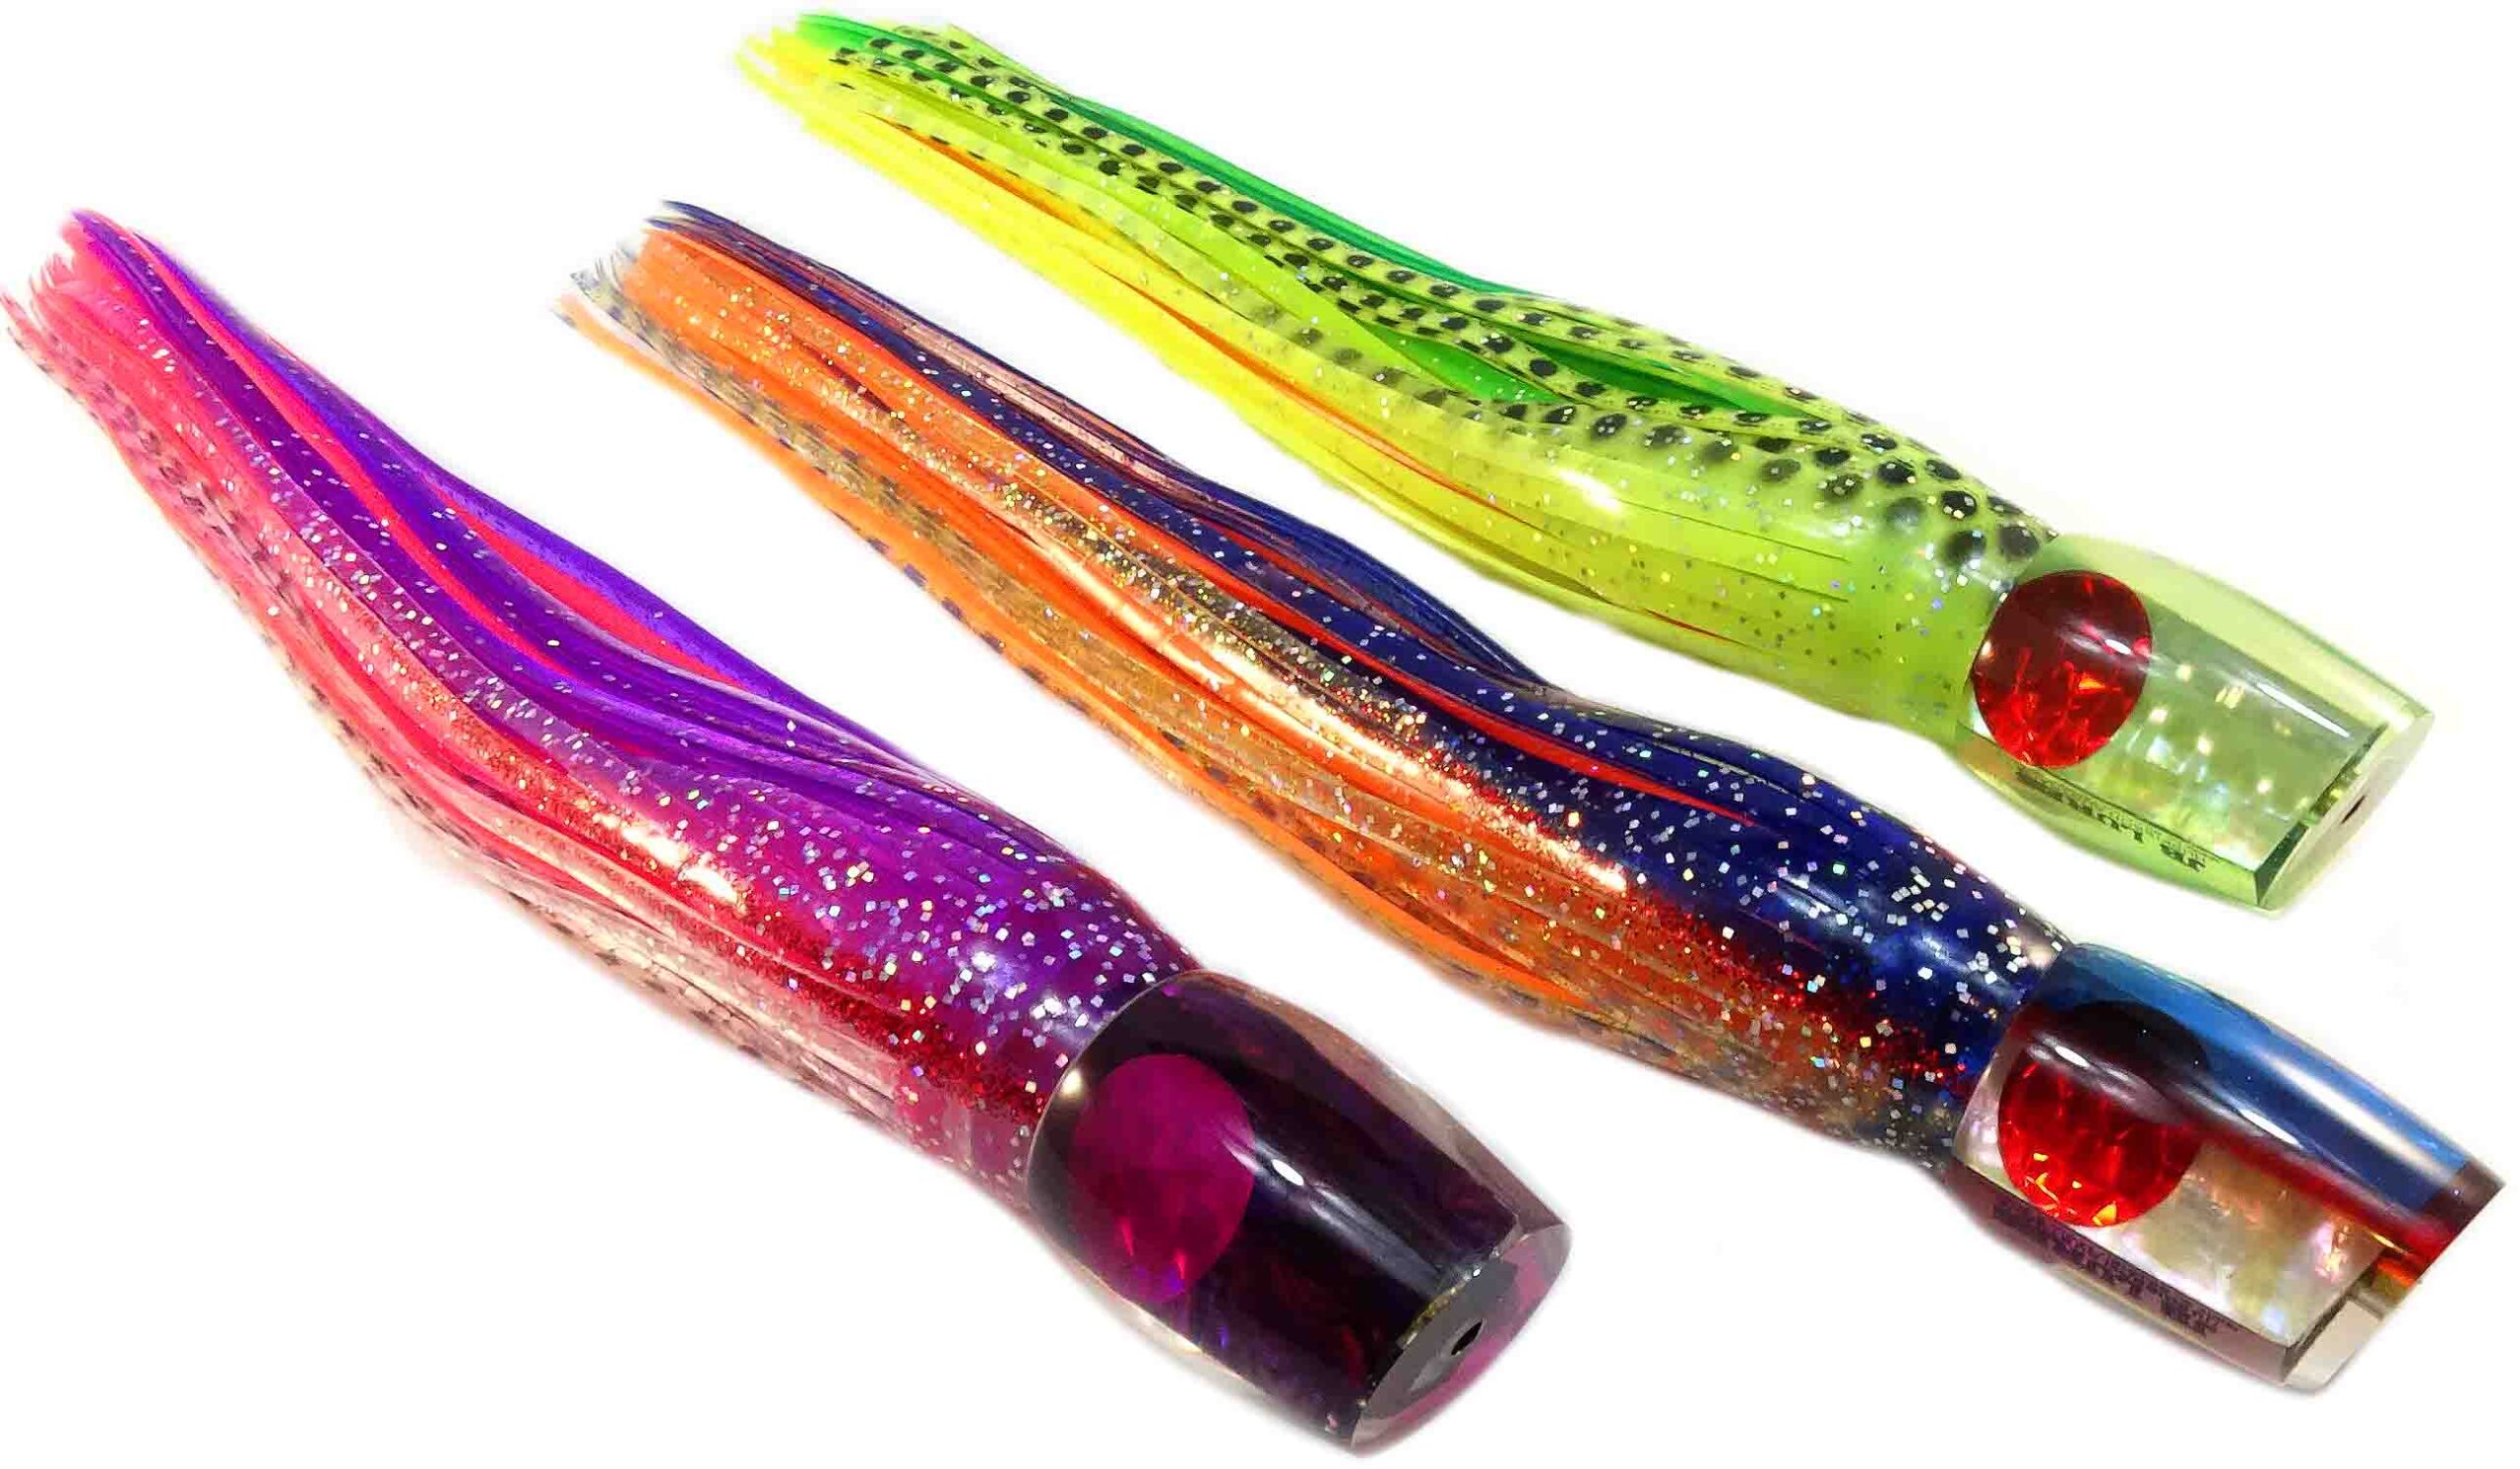 JB Lures - Chook Series - Best Marlin Lures at discounted prices